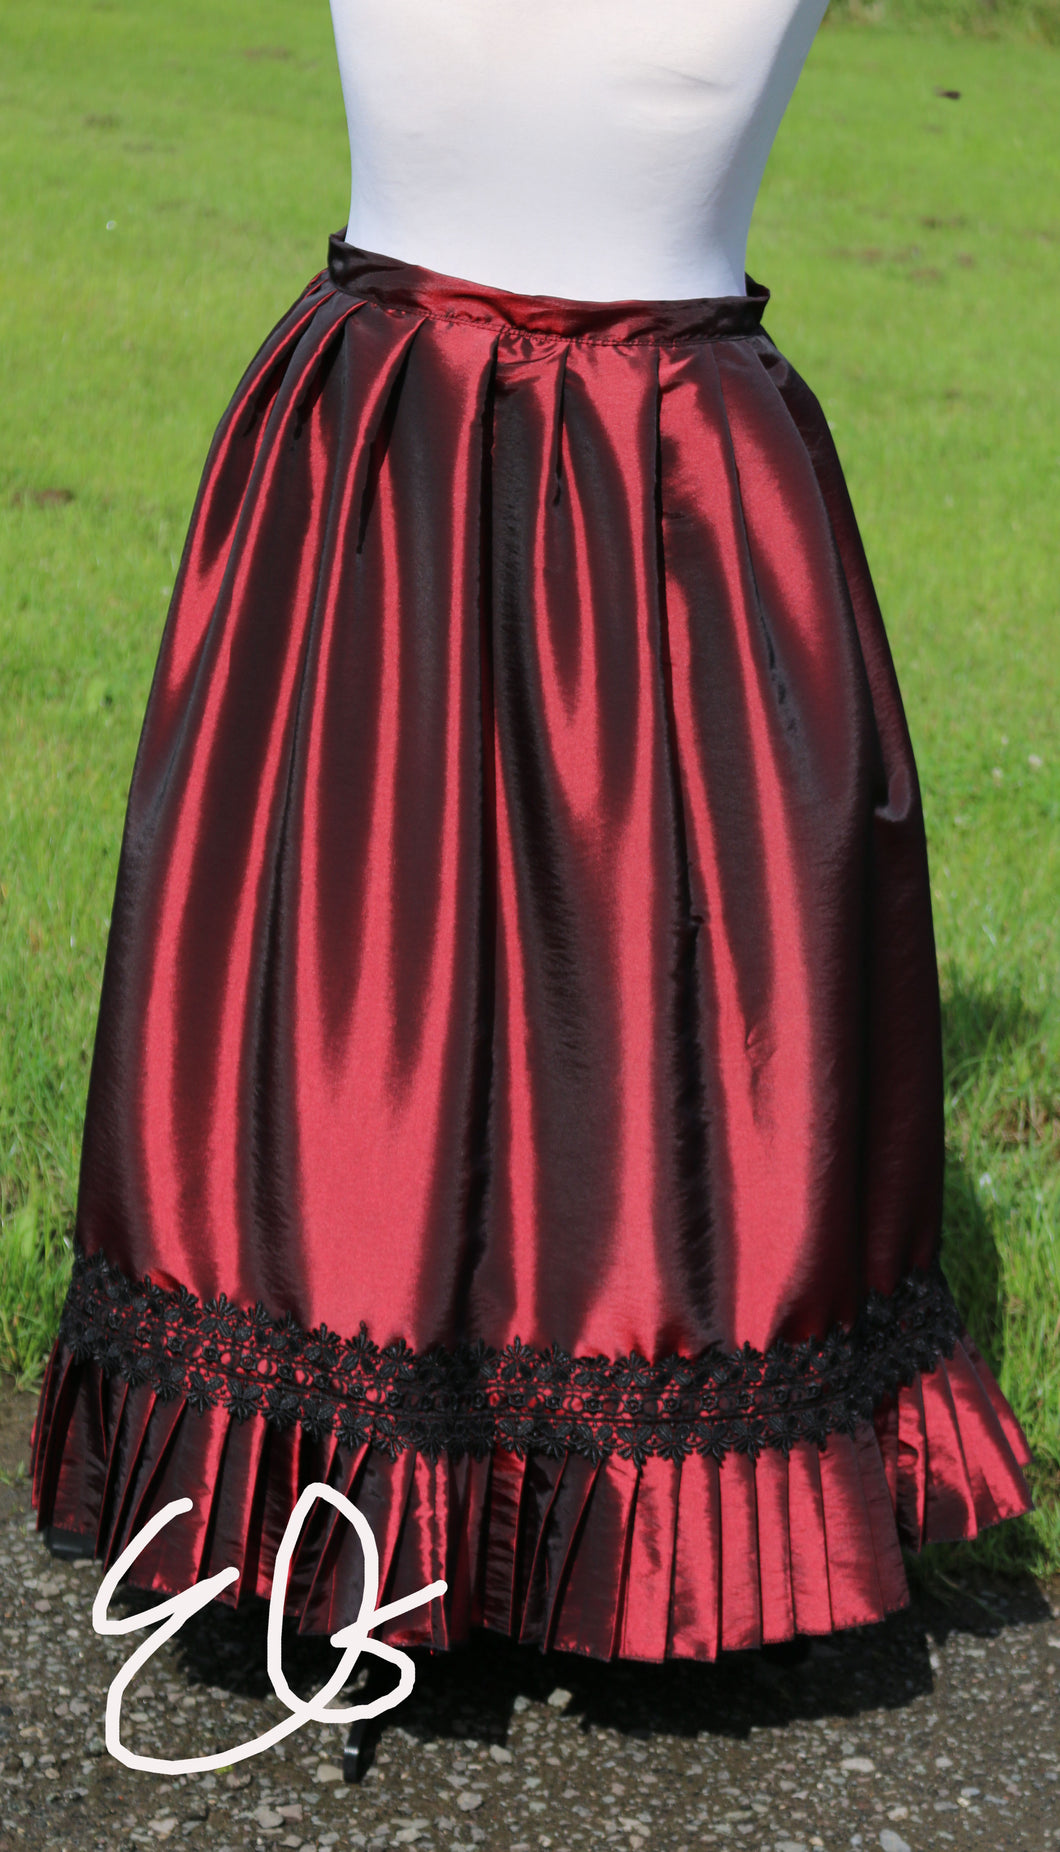 In hand Skirts